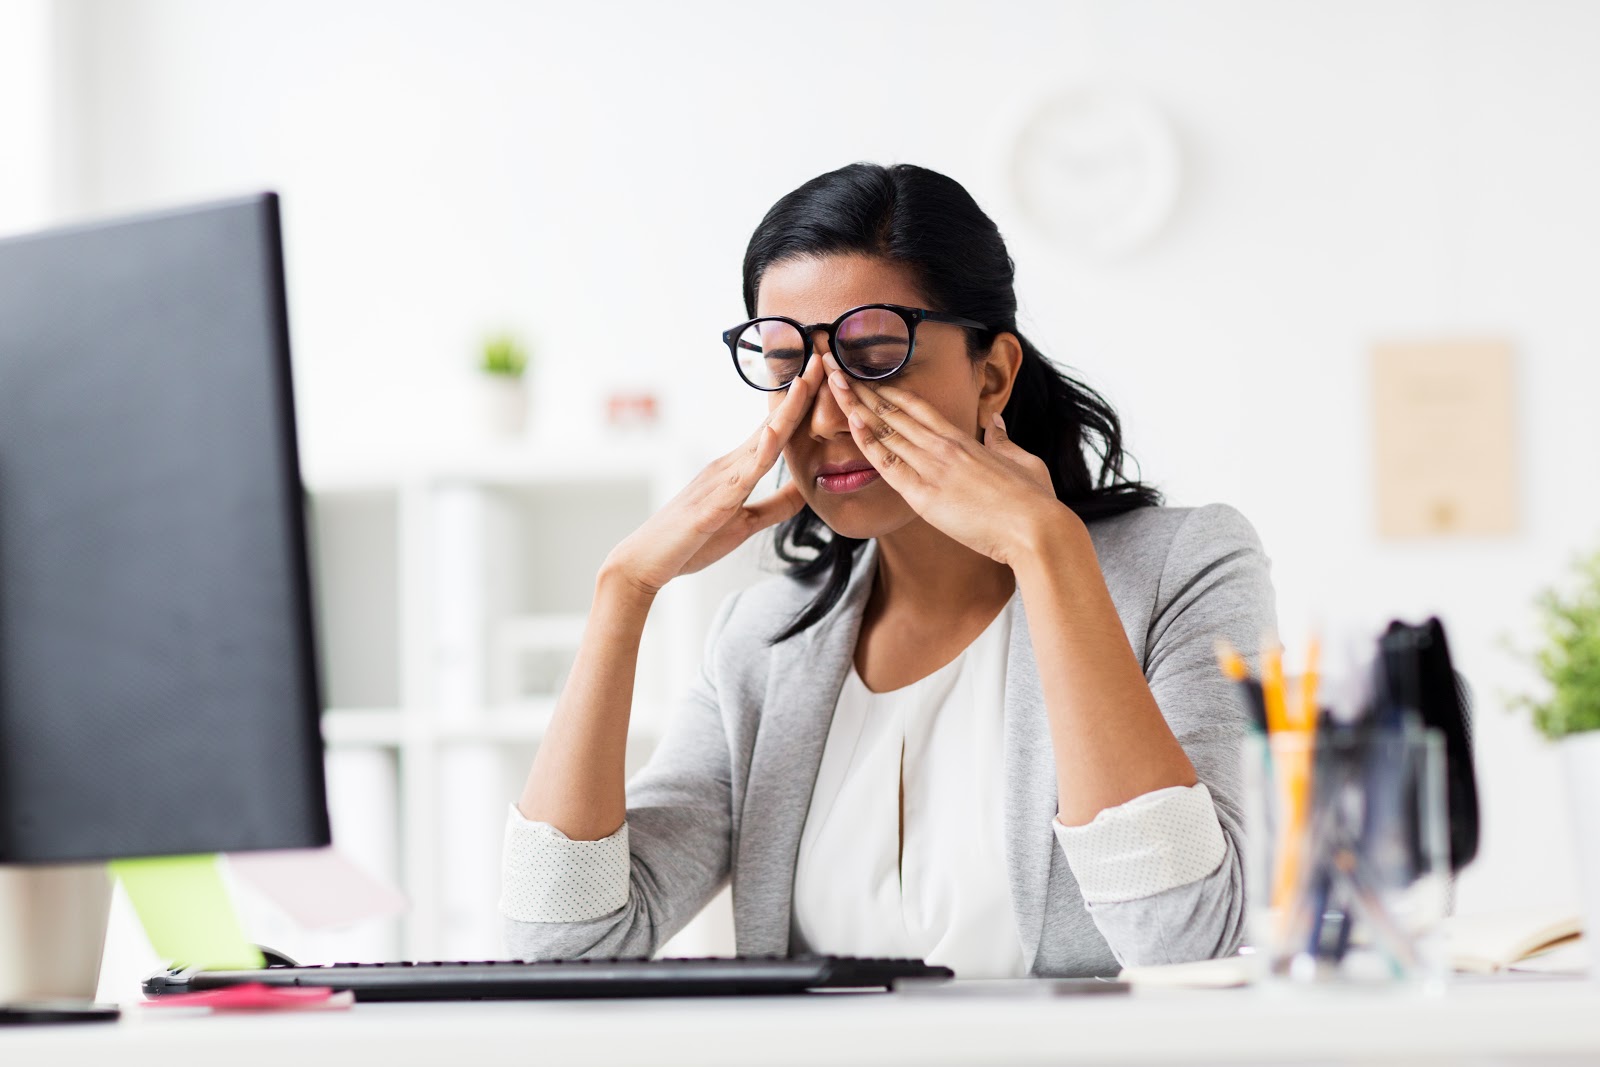 What Can You Do When Your Job is Seriously Stressing Out